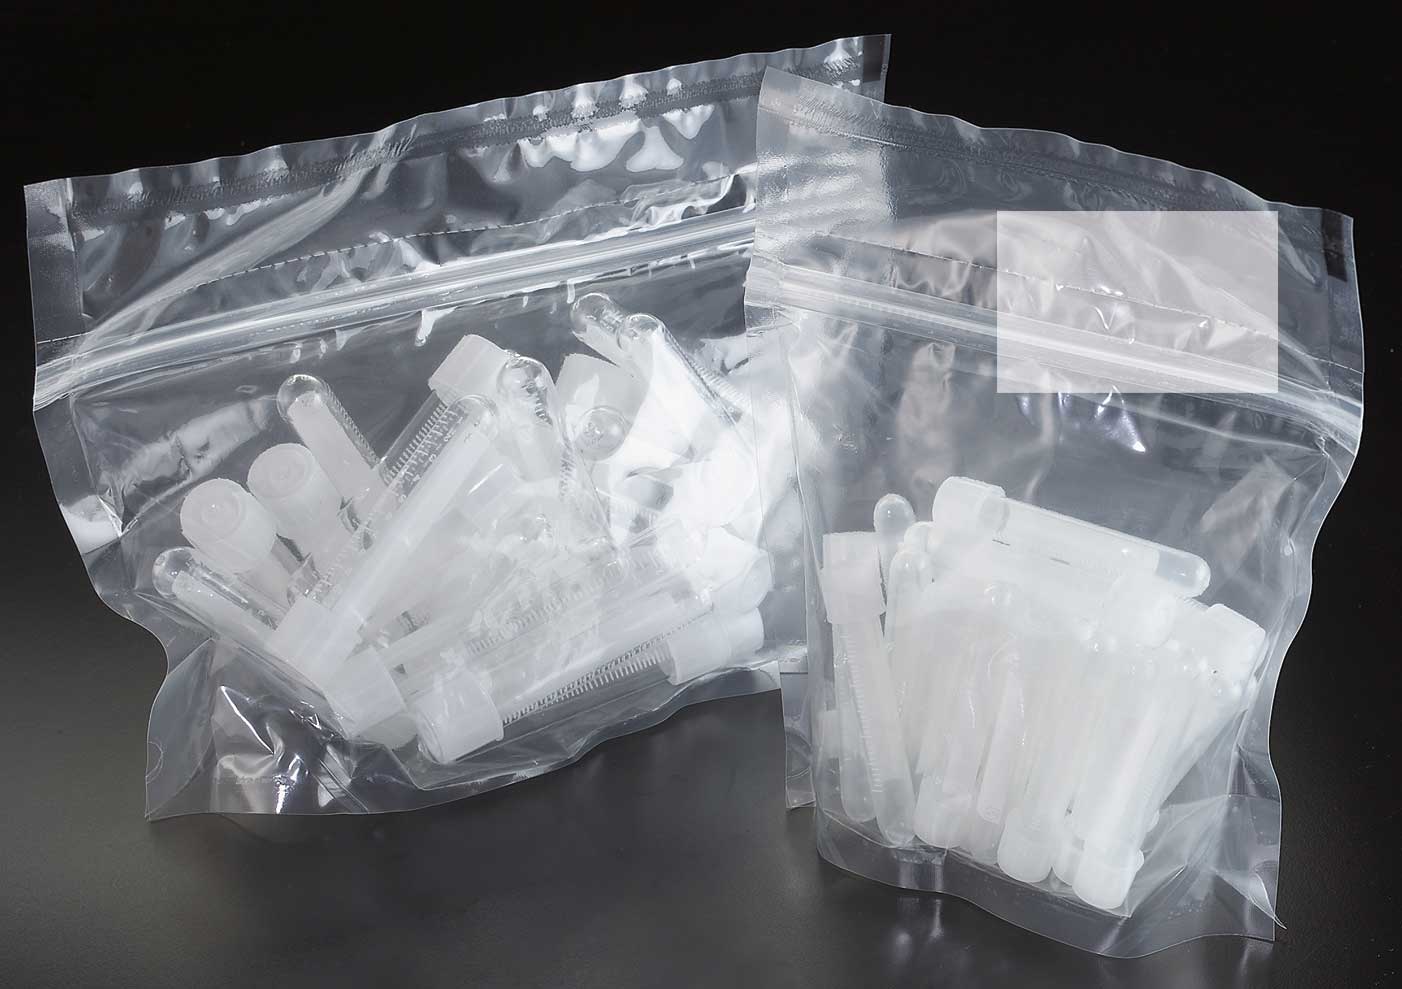 Sterile culture tubes in polystyrene